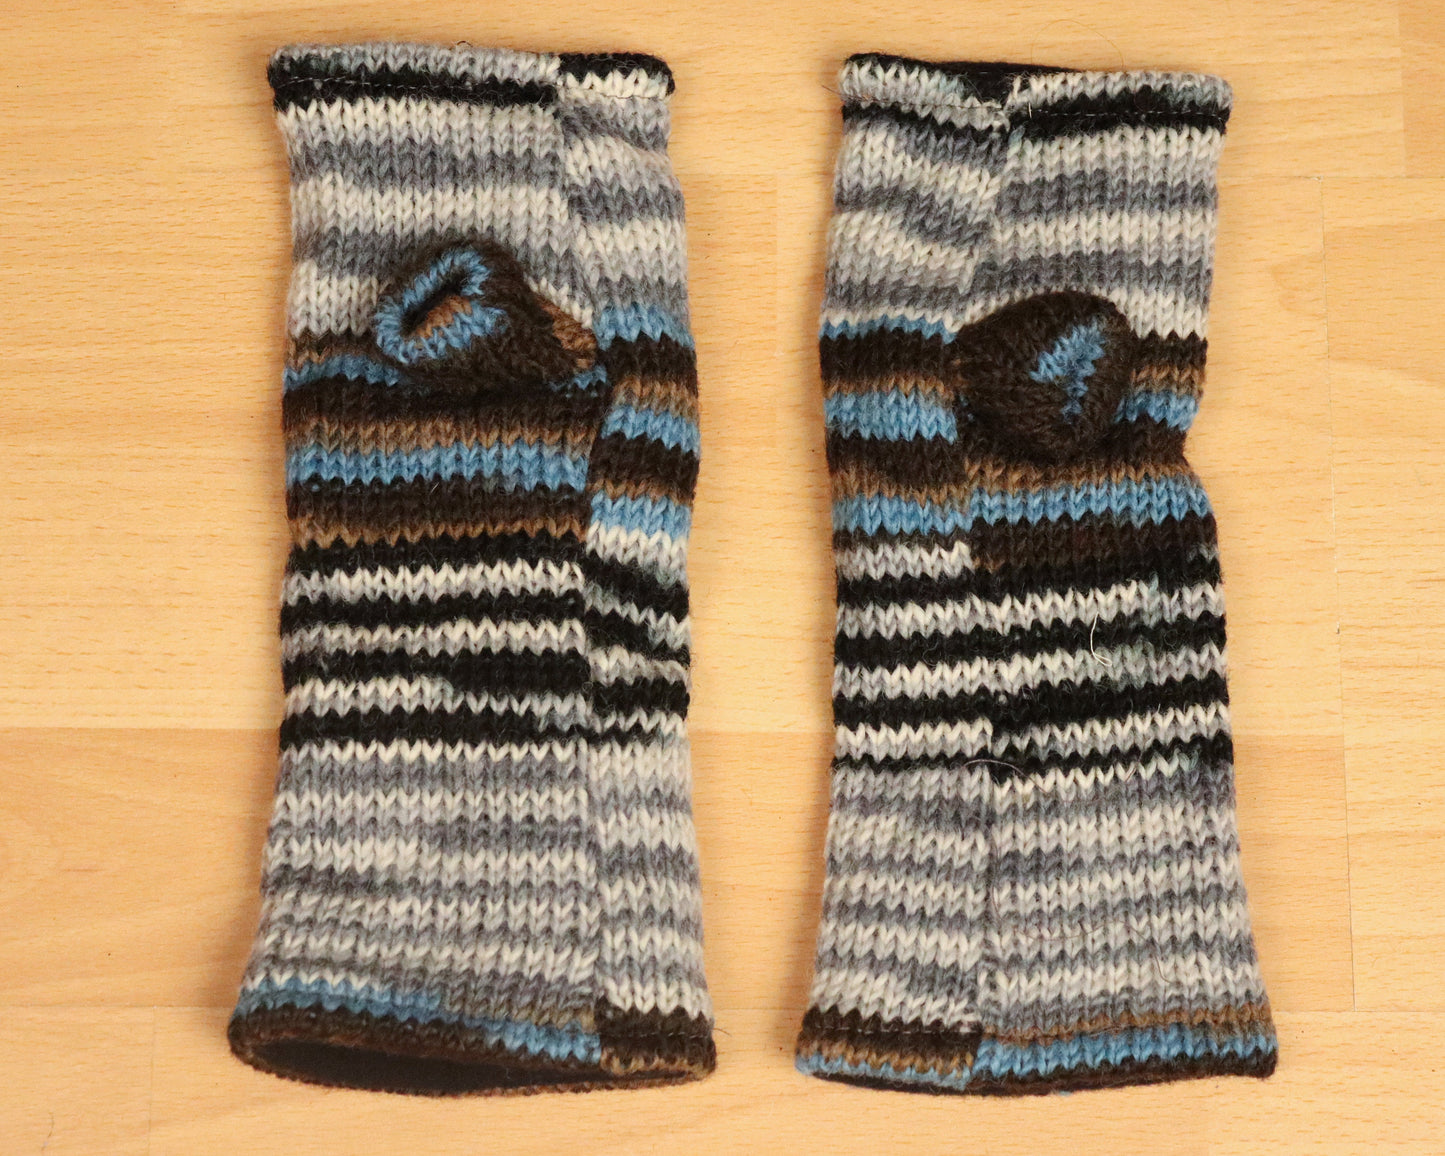 Fleece Lined Knitted Wrist Warmers - Black Blue and Grey Striped - Bare Canvas